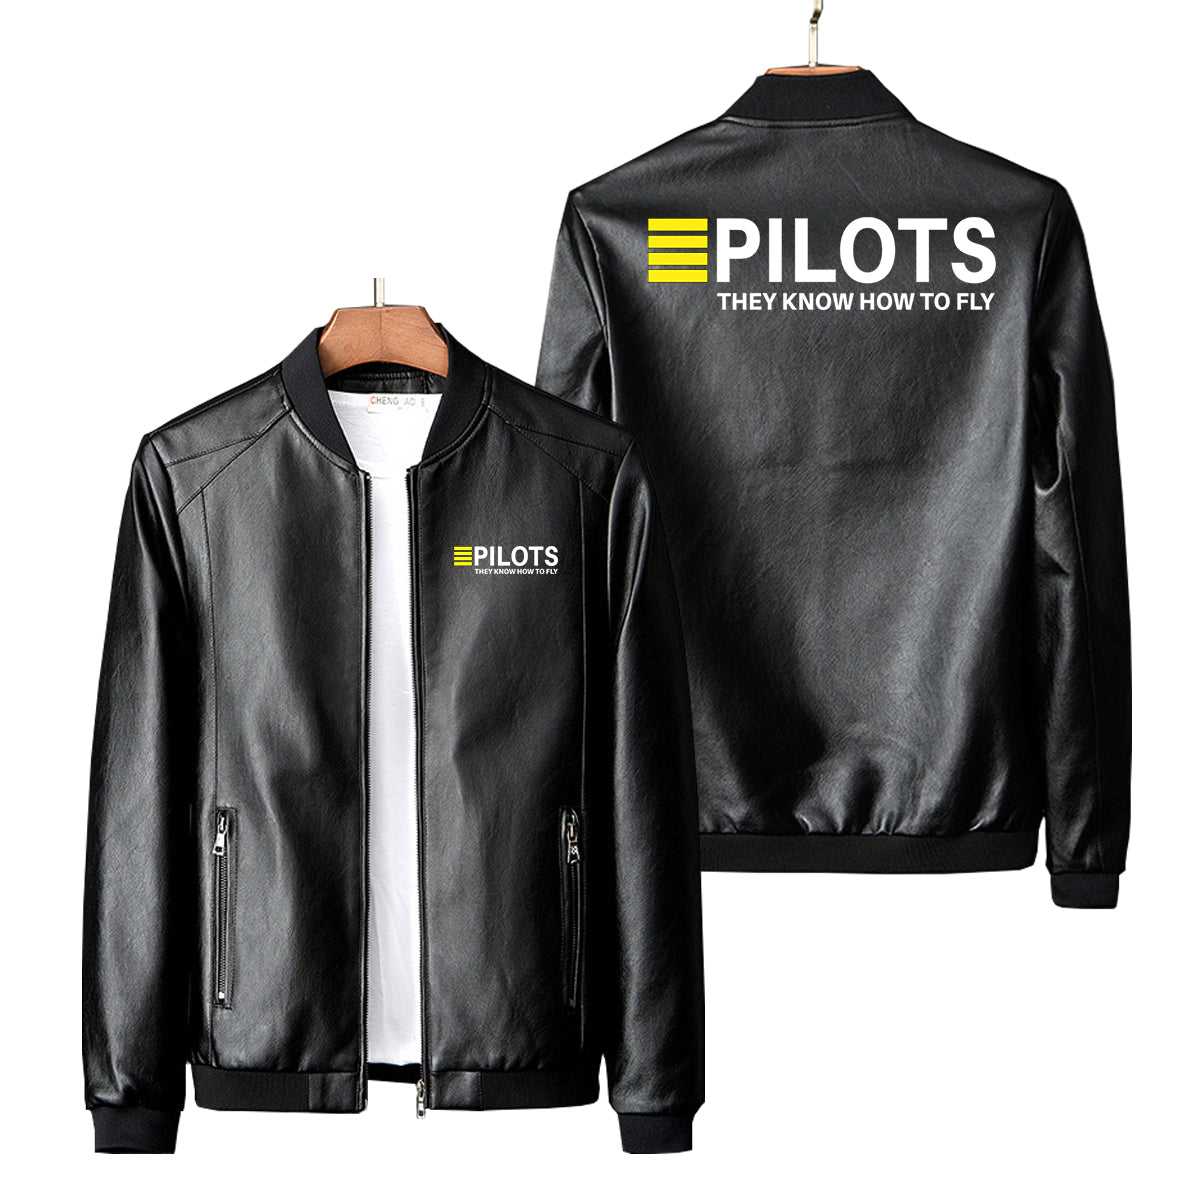 Pilots They Know How To Fly Designed PU Leather Jackets